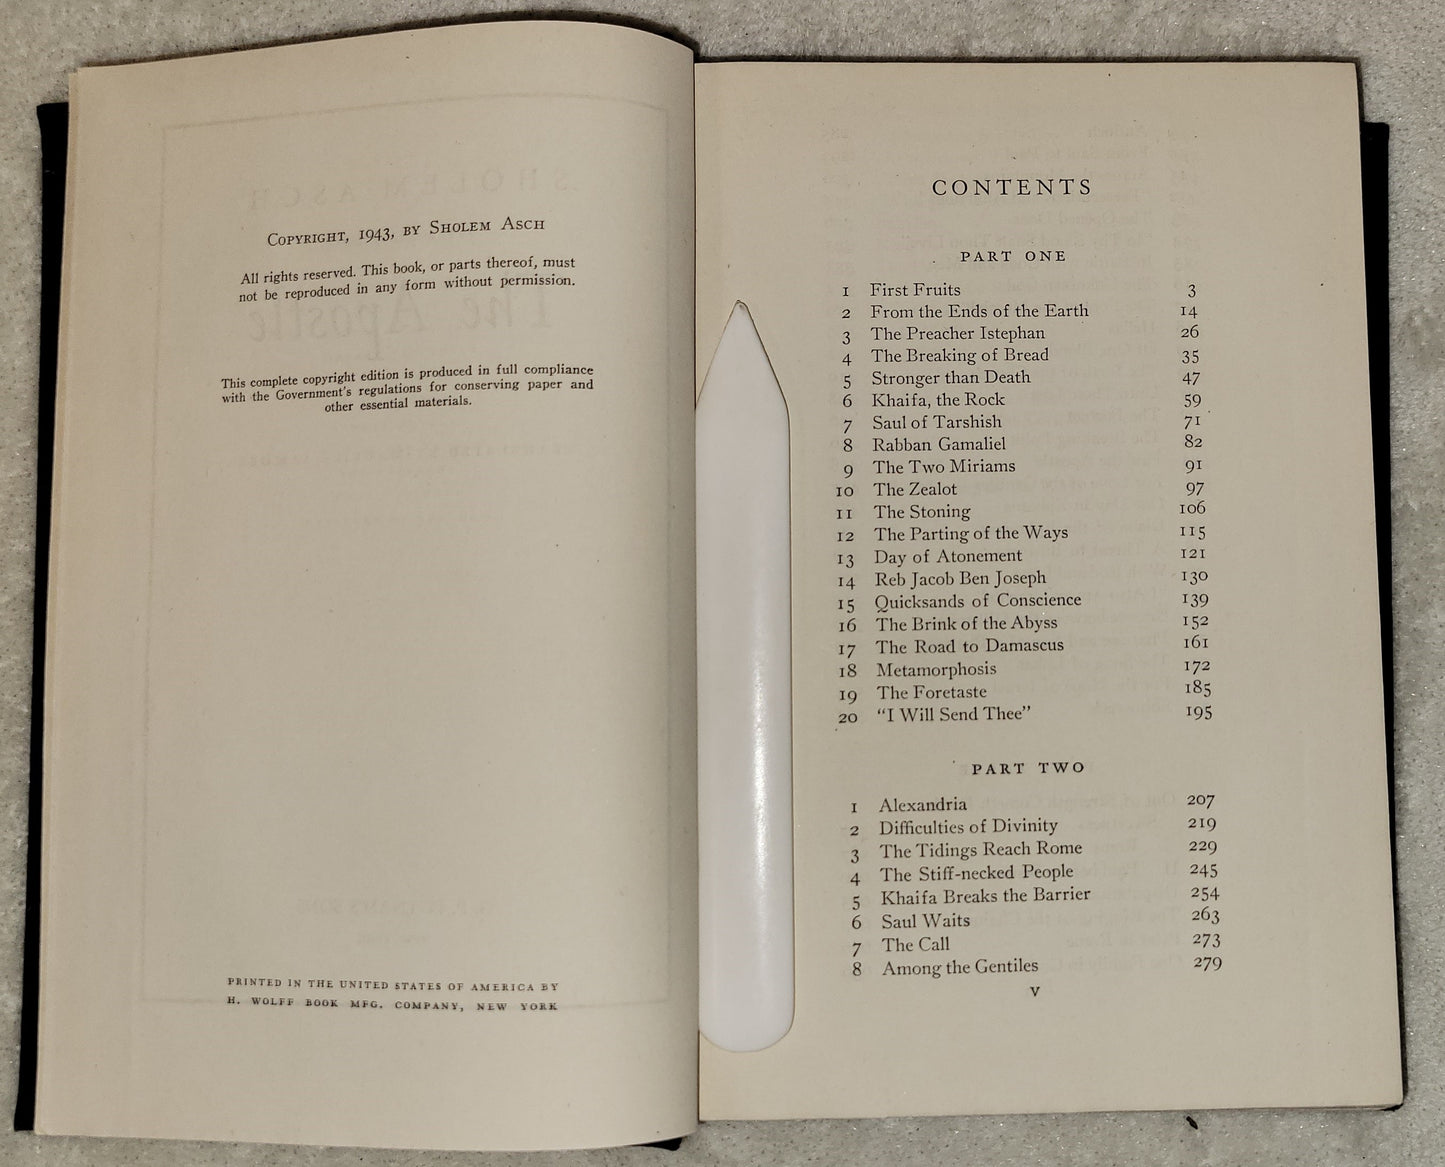 Vintage book for sale “The Apostle” by Sholem Asch published by H. Wolff Book Mfg. Company, 1943. Table of contents.